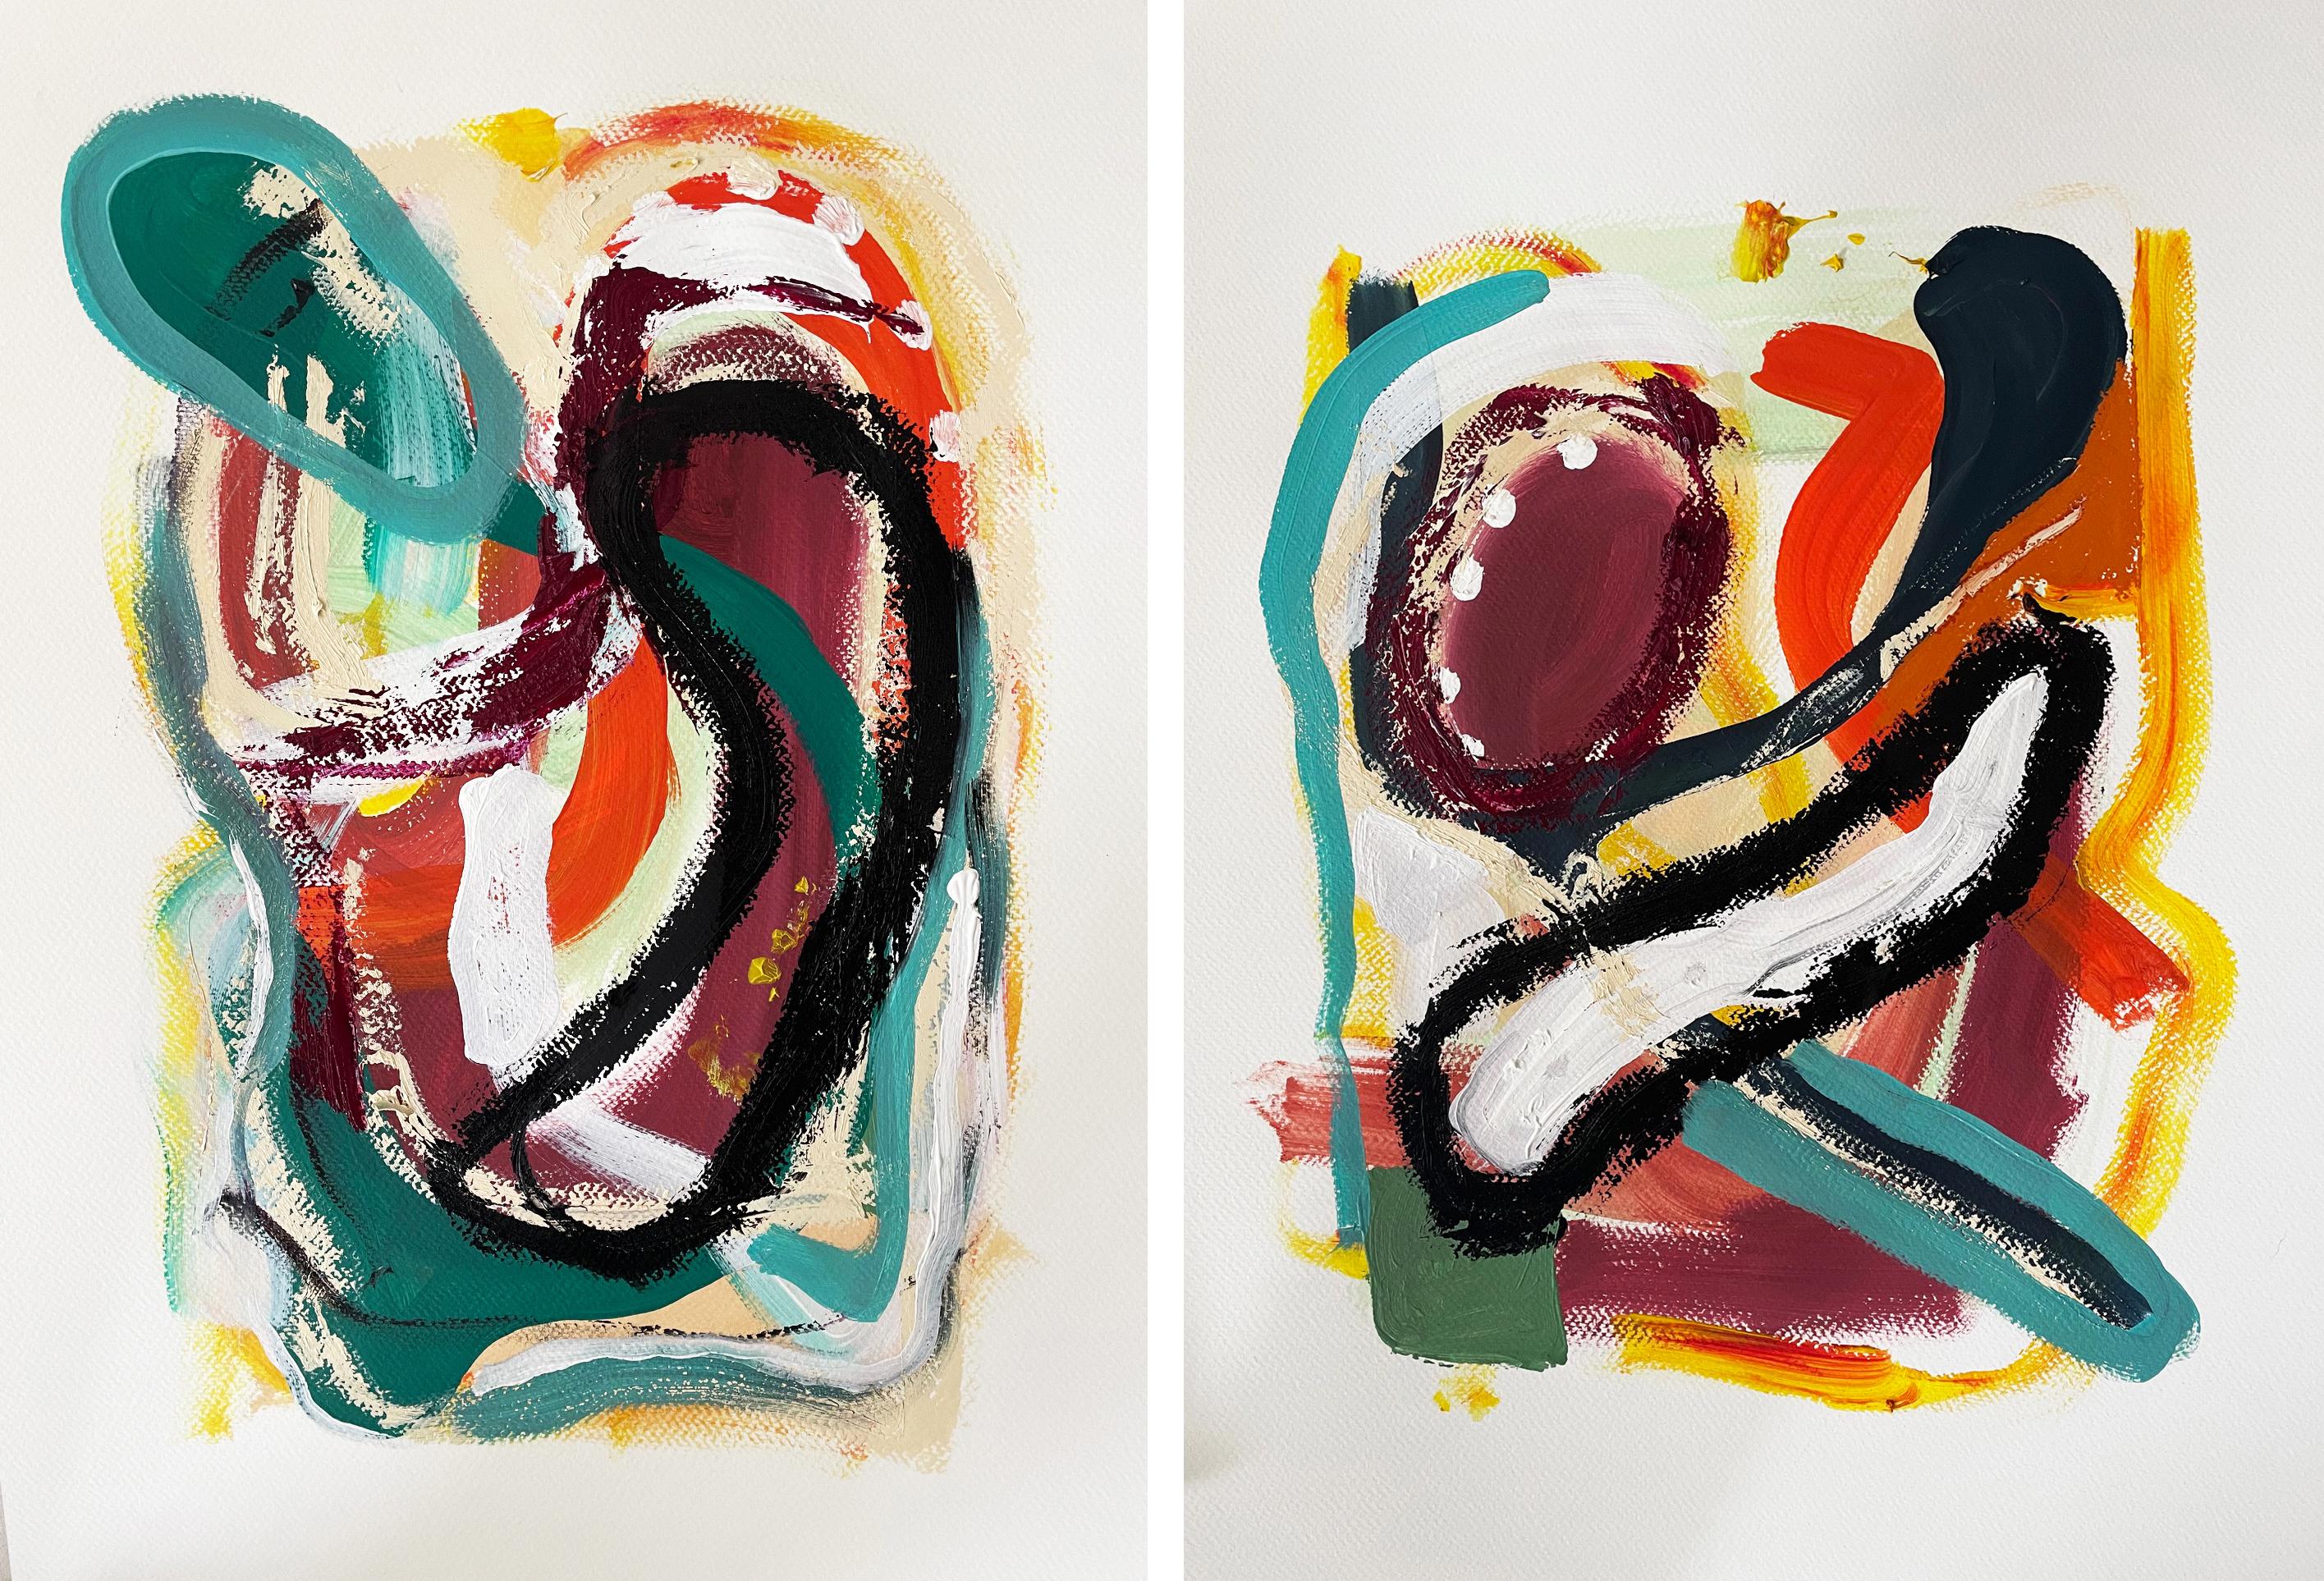 Alec Franco  Abstract Painting - Lab #10 and #8 Paintings. From the Lab series